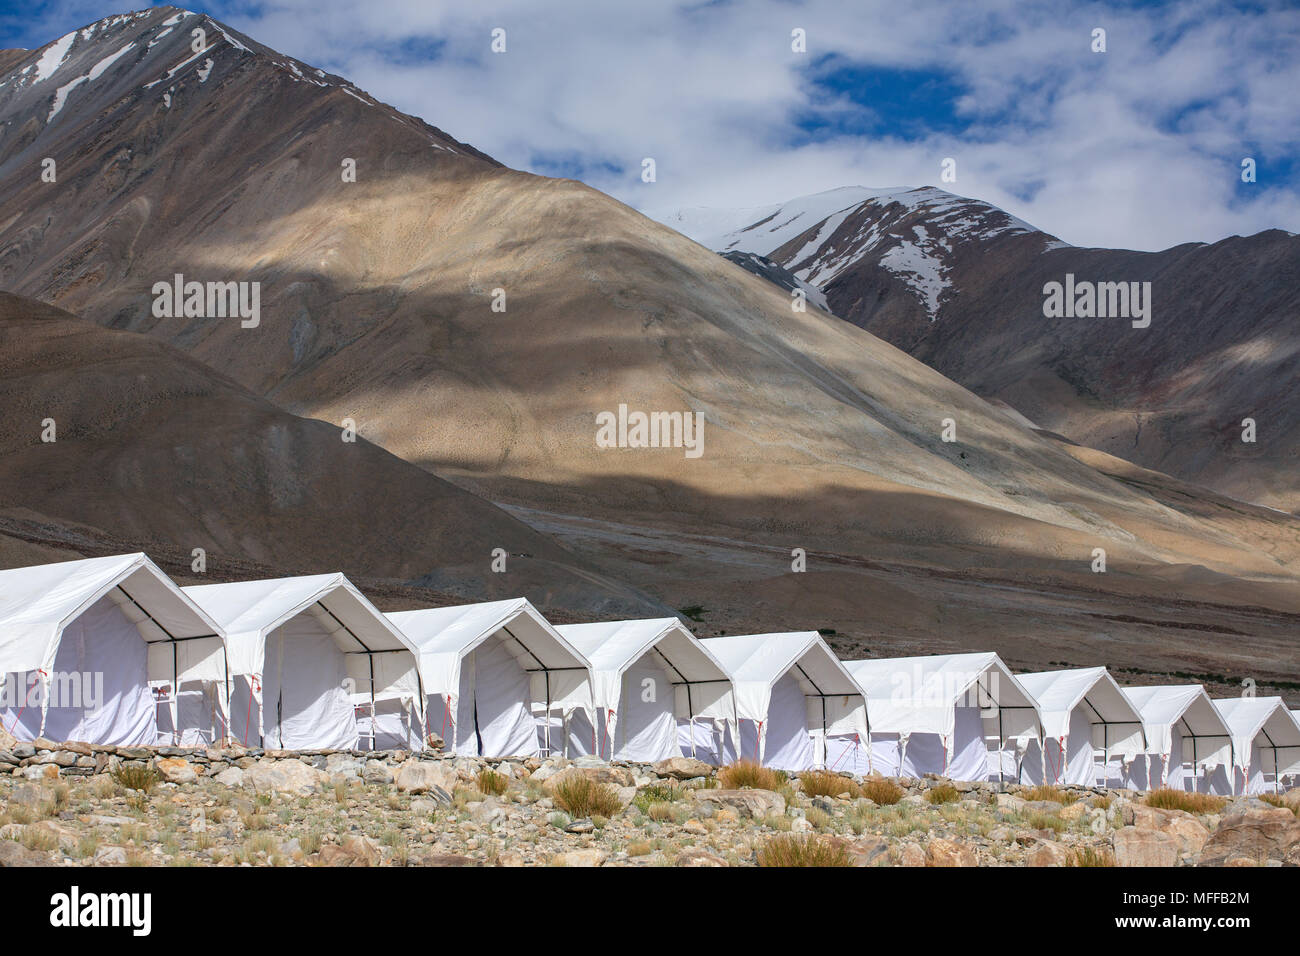 Tented Tourist Camp bei Pangong Tso See in Ladakh, Indien. Stockfoto